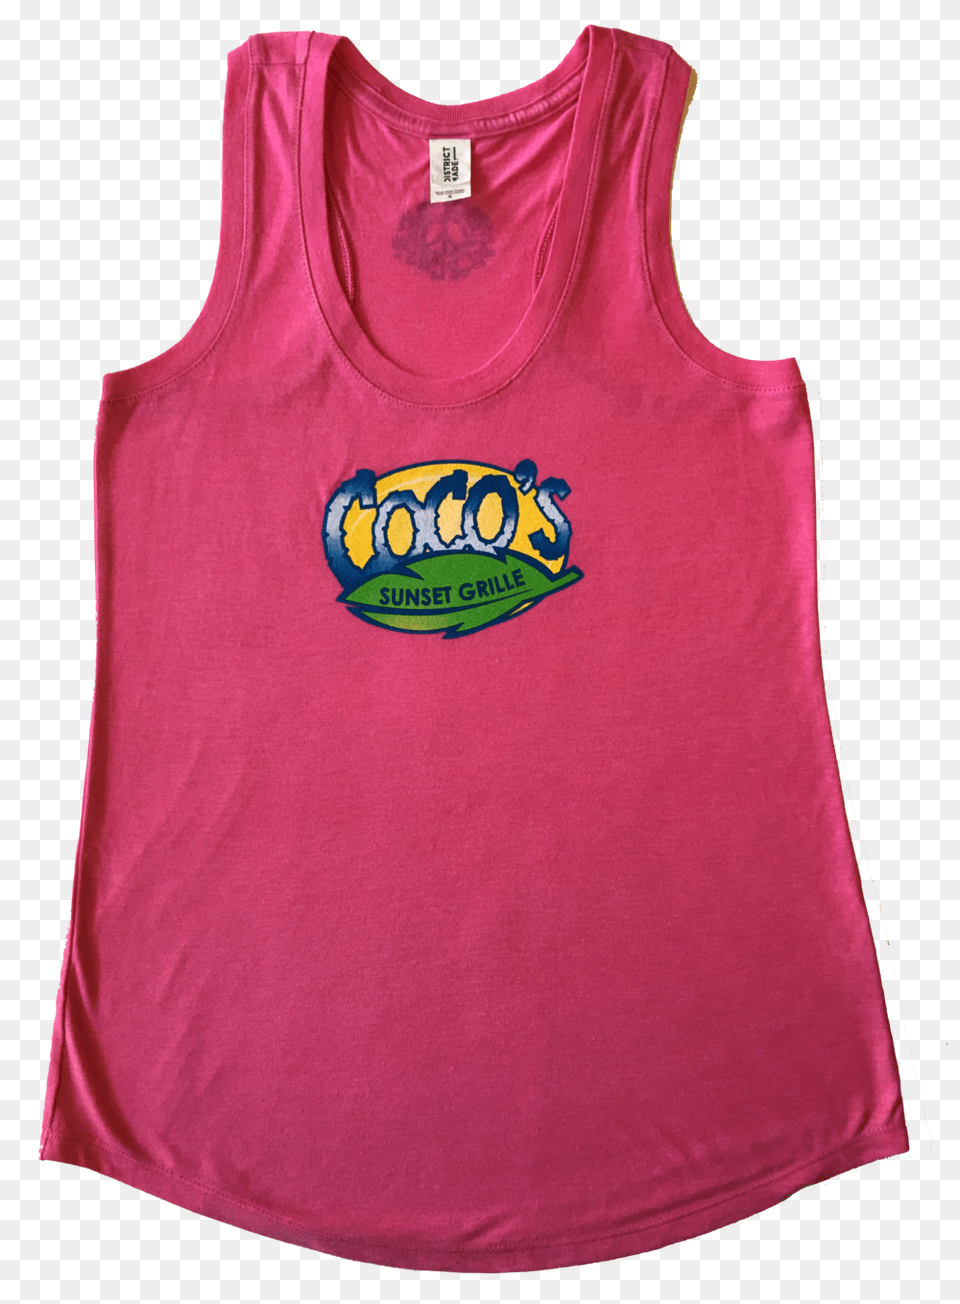 Tank Top Cocos Sunset Grille, Clothing, Tank Top, Shirt Png Image